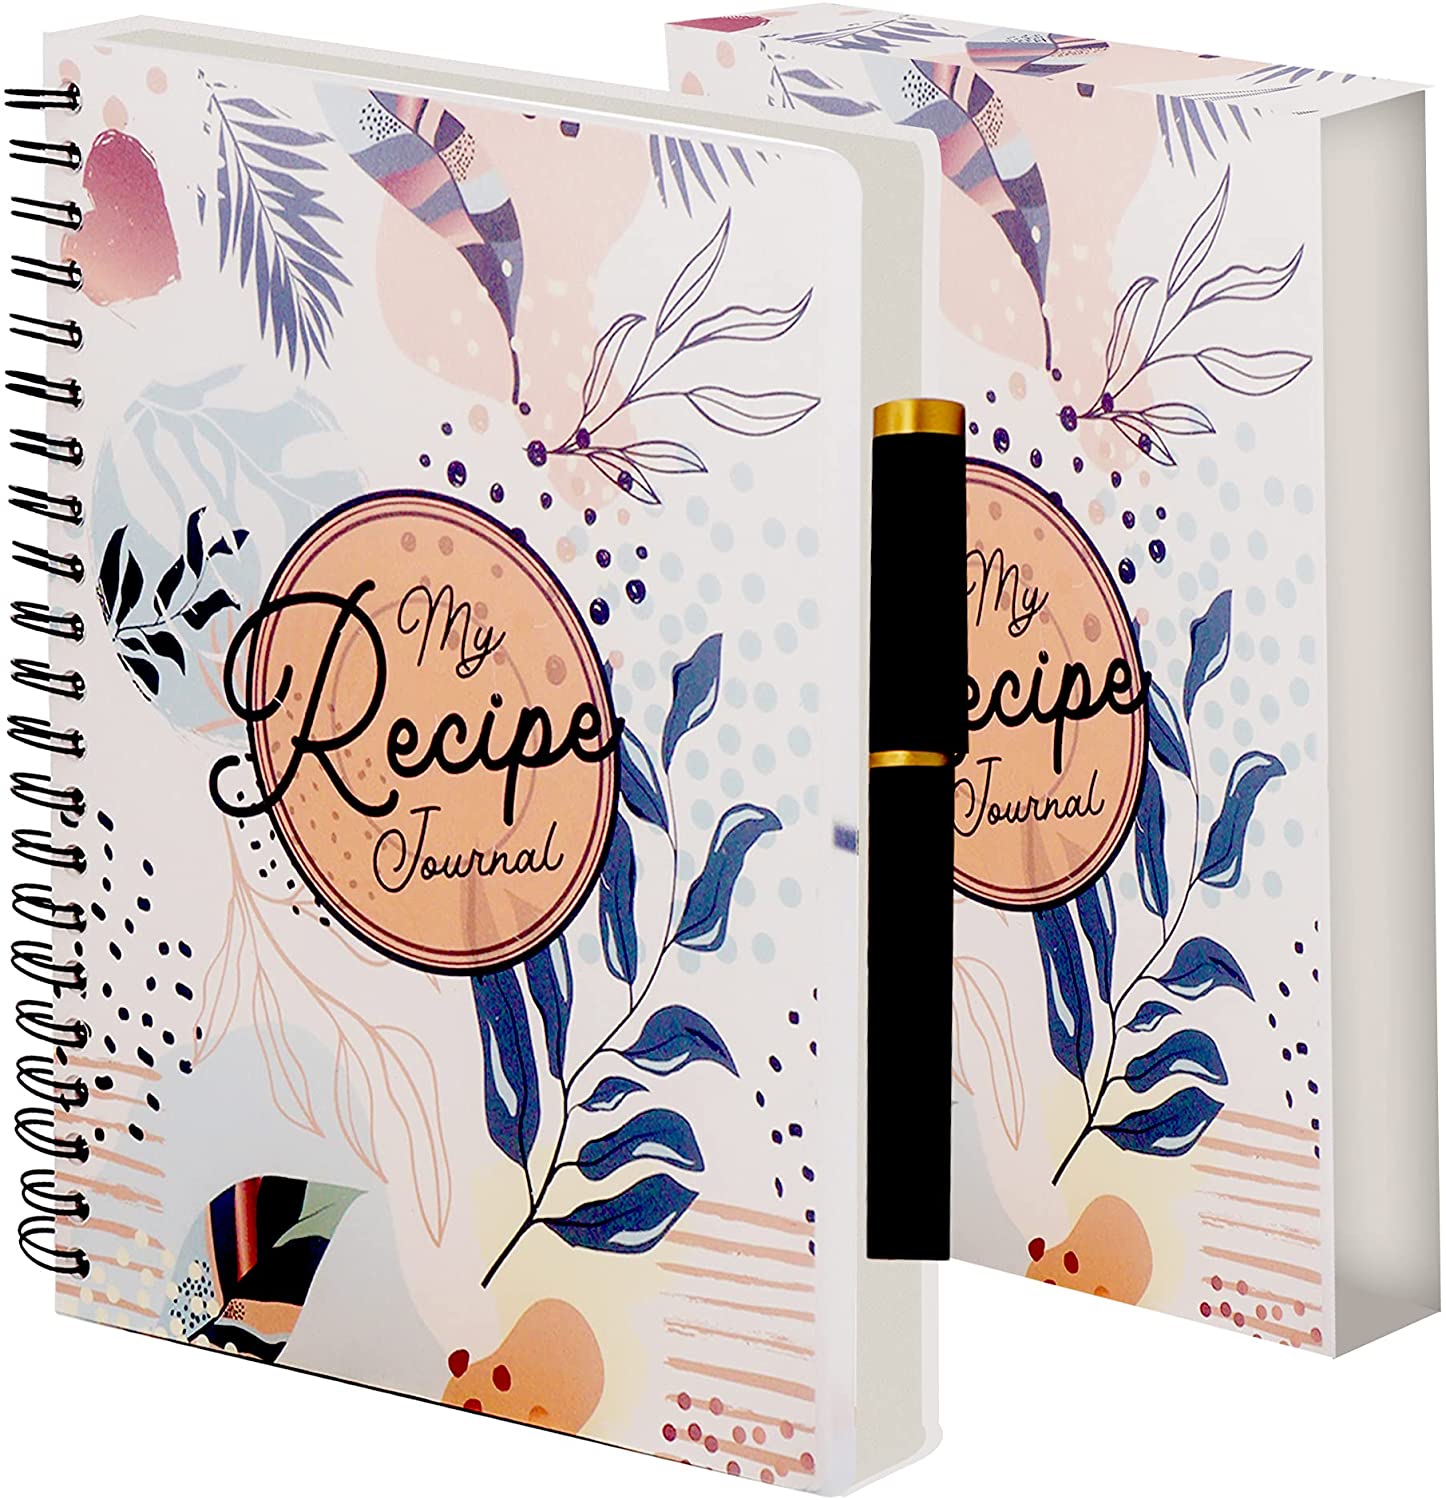 Performore My Recipe Journal 8.5 x 11 Spiral Bound Recipe Notebook, Includes Pen and slipcase with 100 Blank Pages